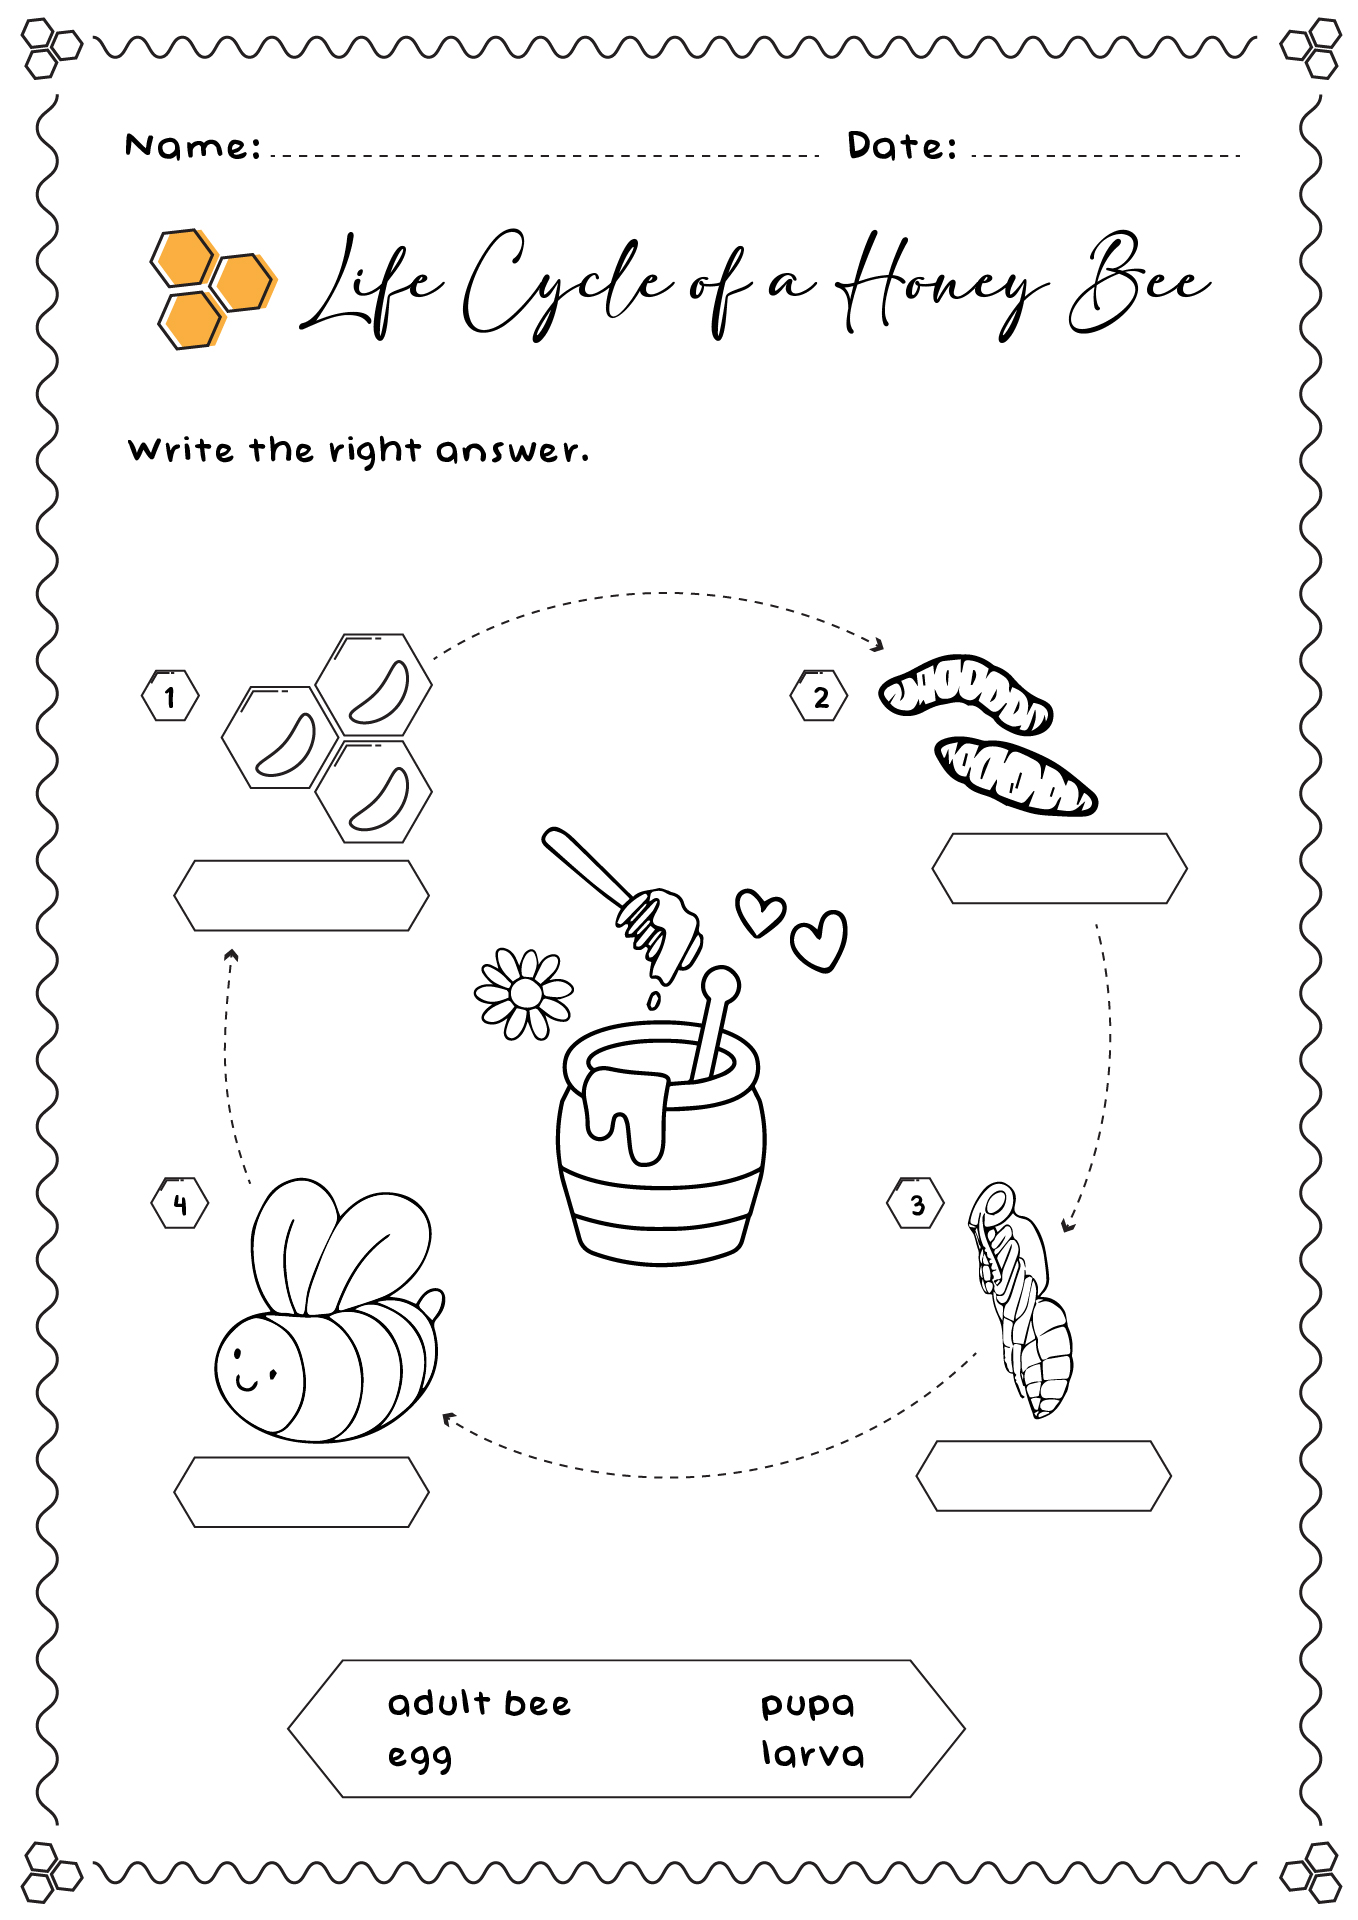 12 Best Images of Bee Worksheets For First Graders - Honey Bee Activity